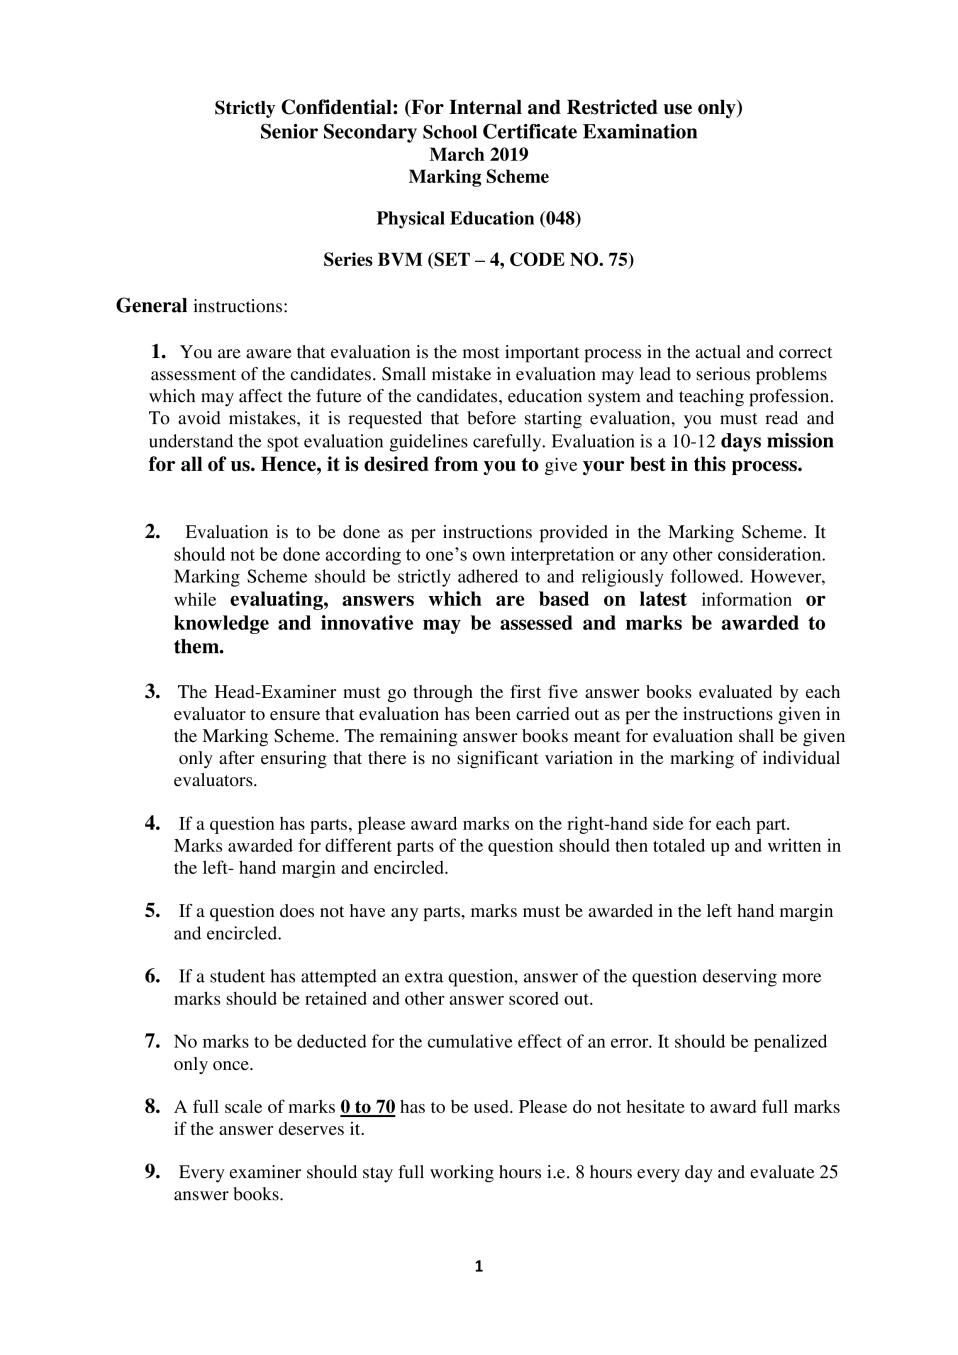 CBSE Class 12 Physical Education Question Paper 2019 Solutions - Page 1